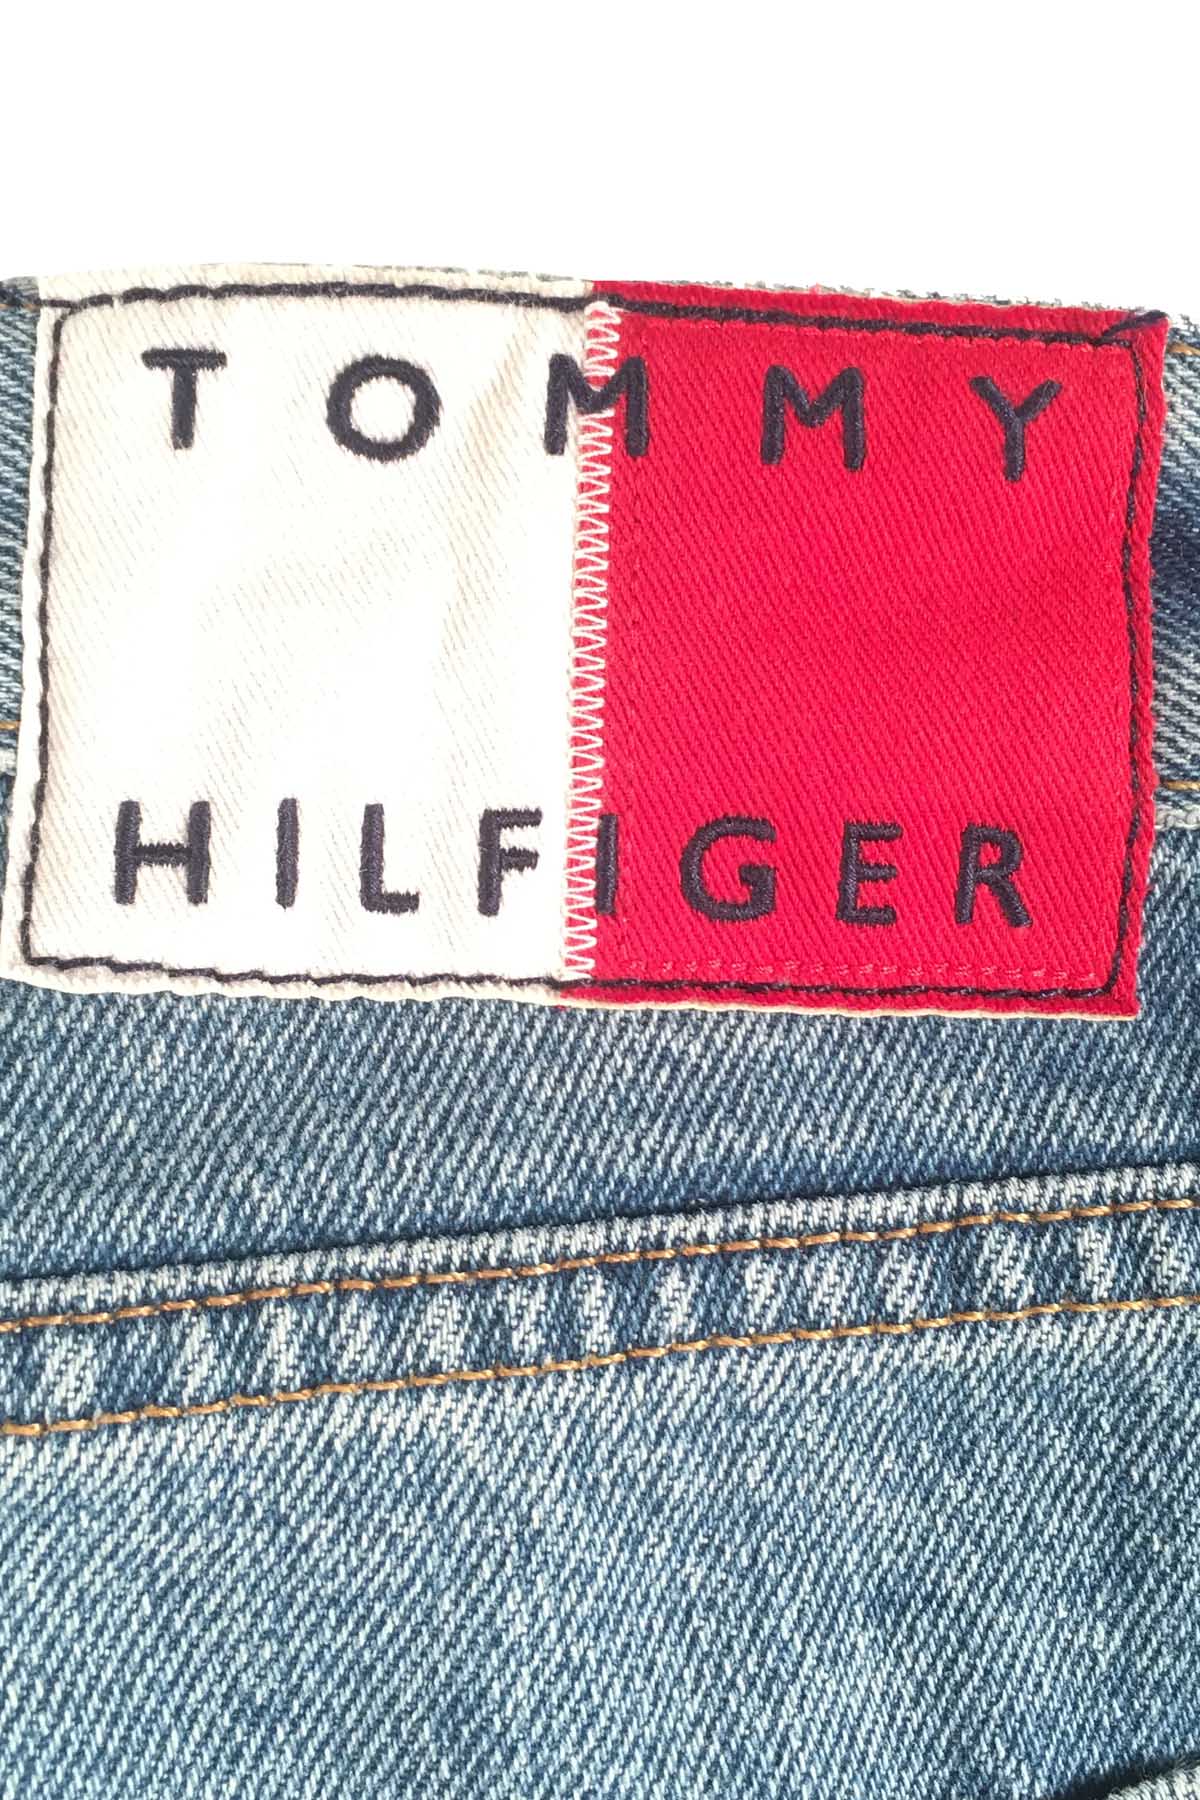 Tommy Hilfiger Medium Blue Wash Distressed Relaxed Tapered Jeans ...